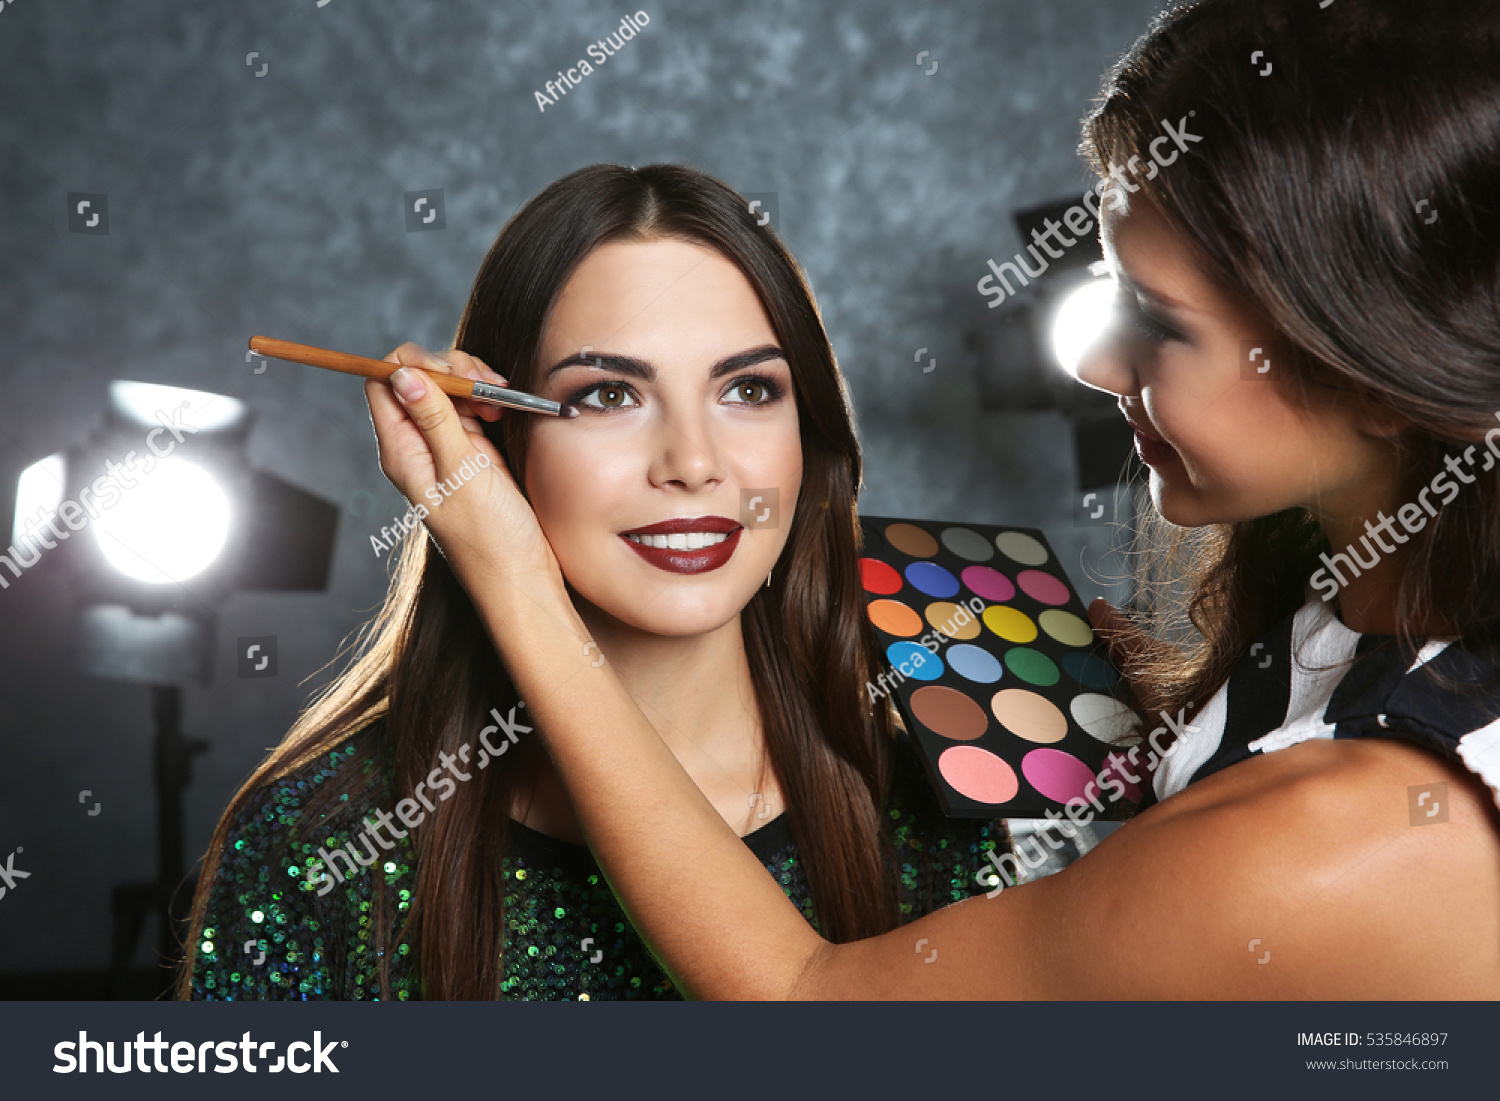 Professional makeup artist working with beautiful young woman #535846897